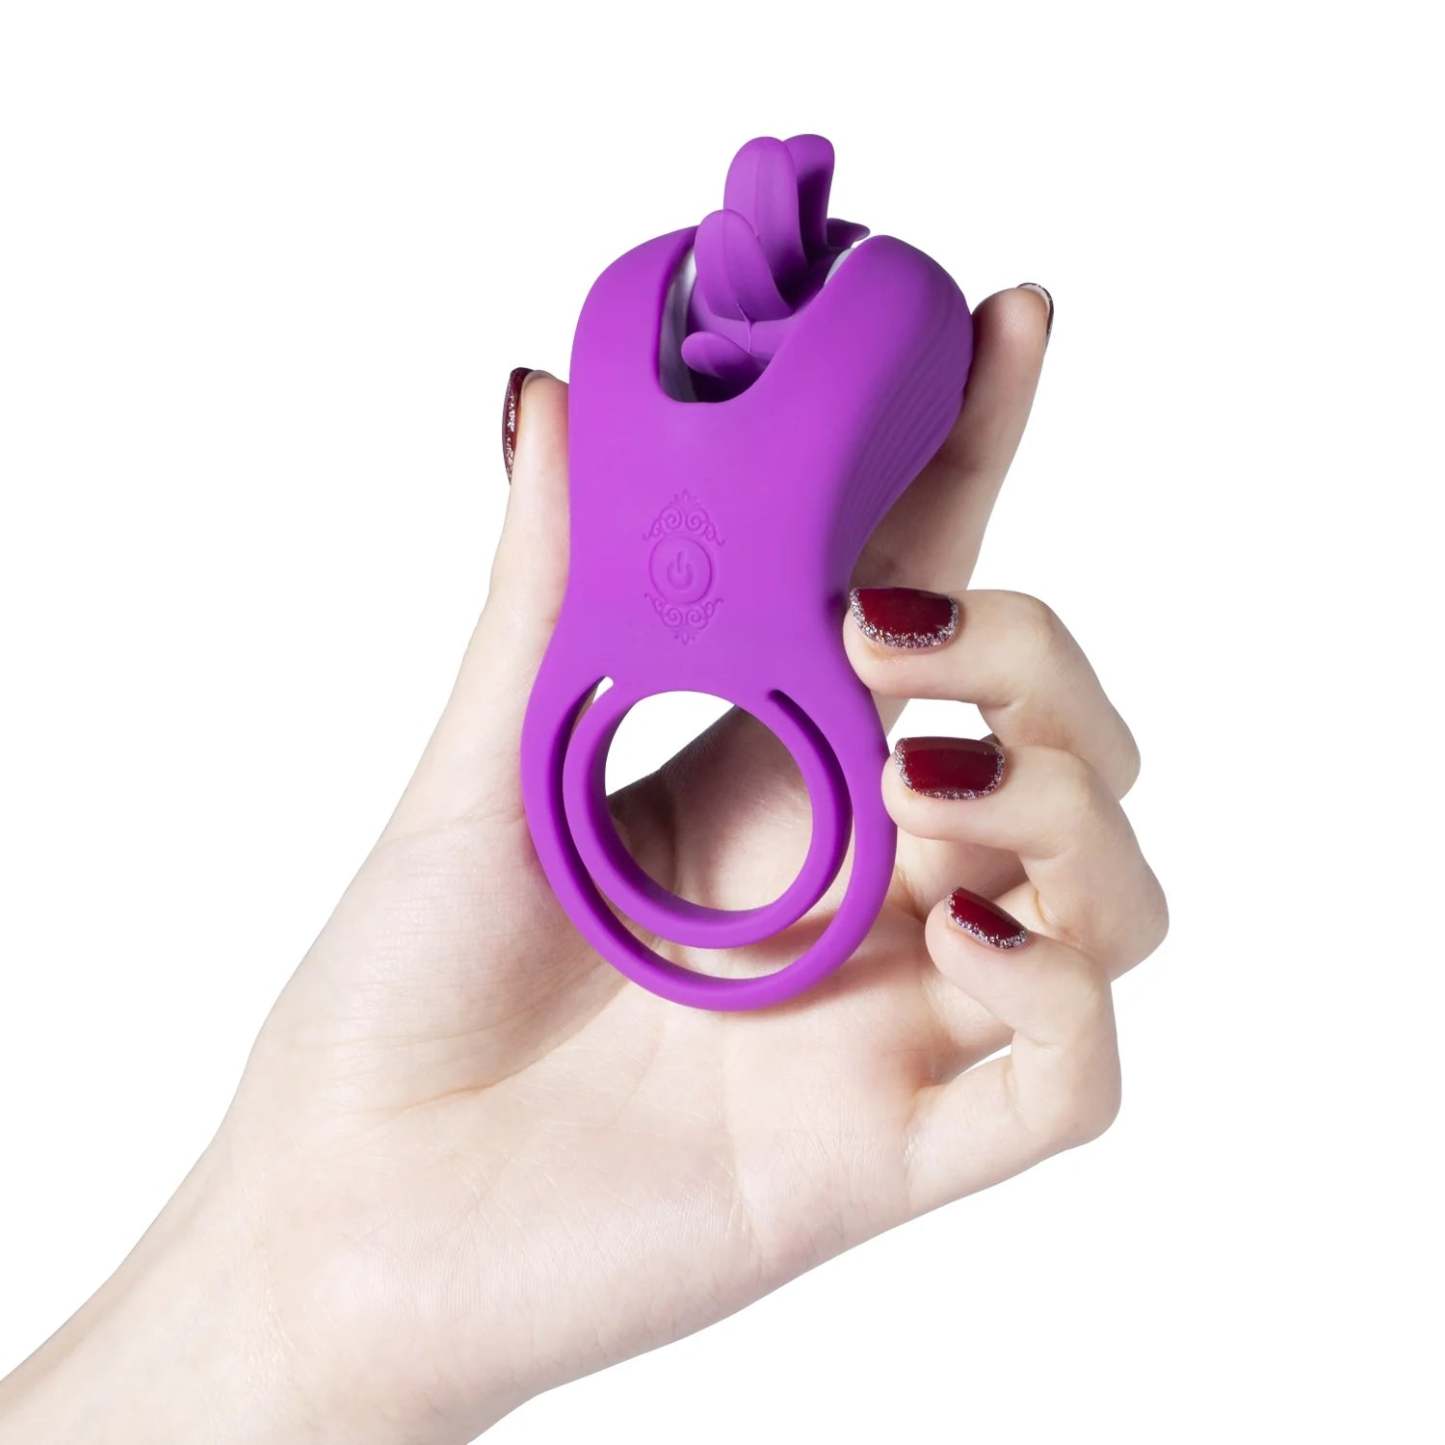 Roxy Cock Ring: Enhance Your Pleasure and Performance-BestGSpot